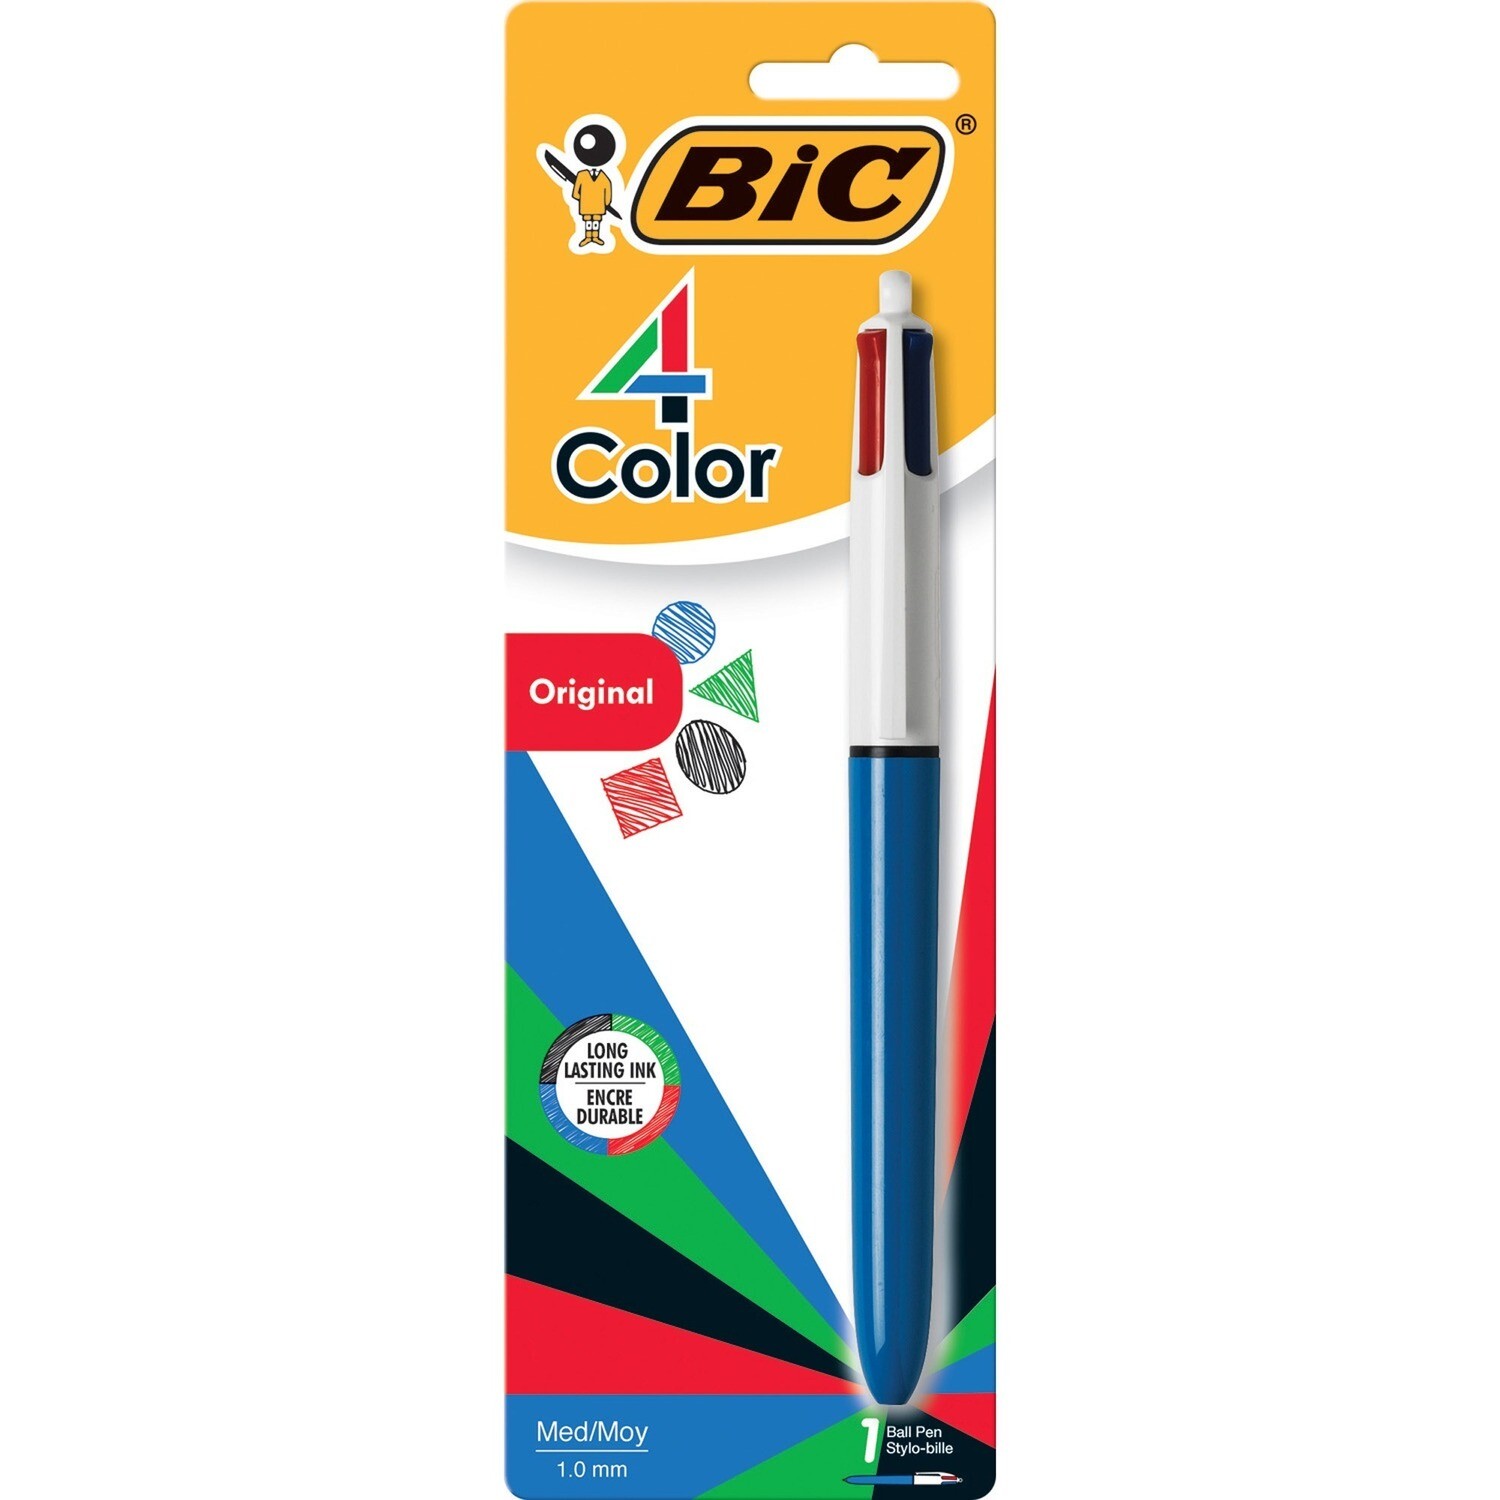 Pen, Ballpoint, Retractable, 4 Colours in 1 Black, Blue, Red, Green, Singles, 1.0 Mm, Refillable